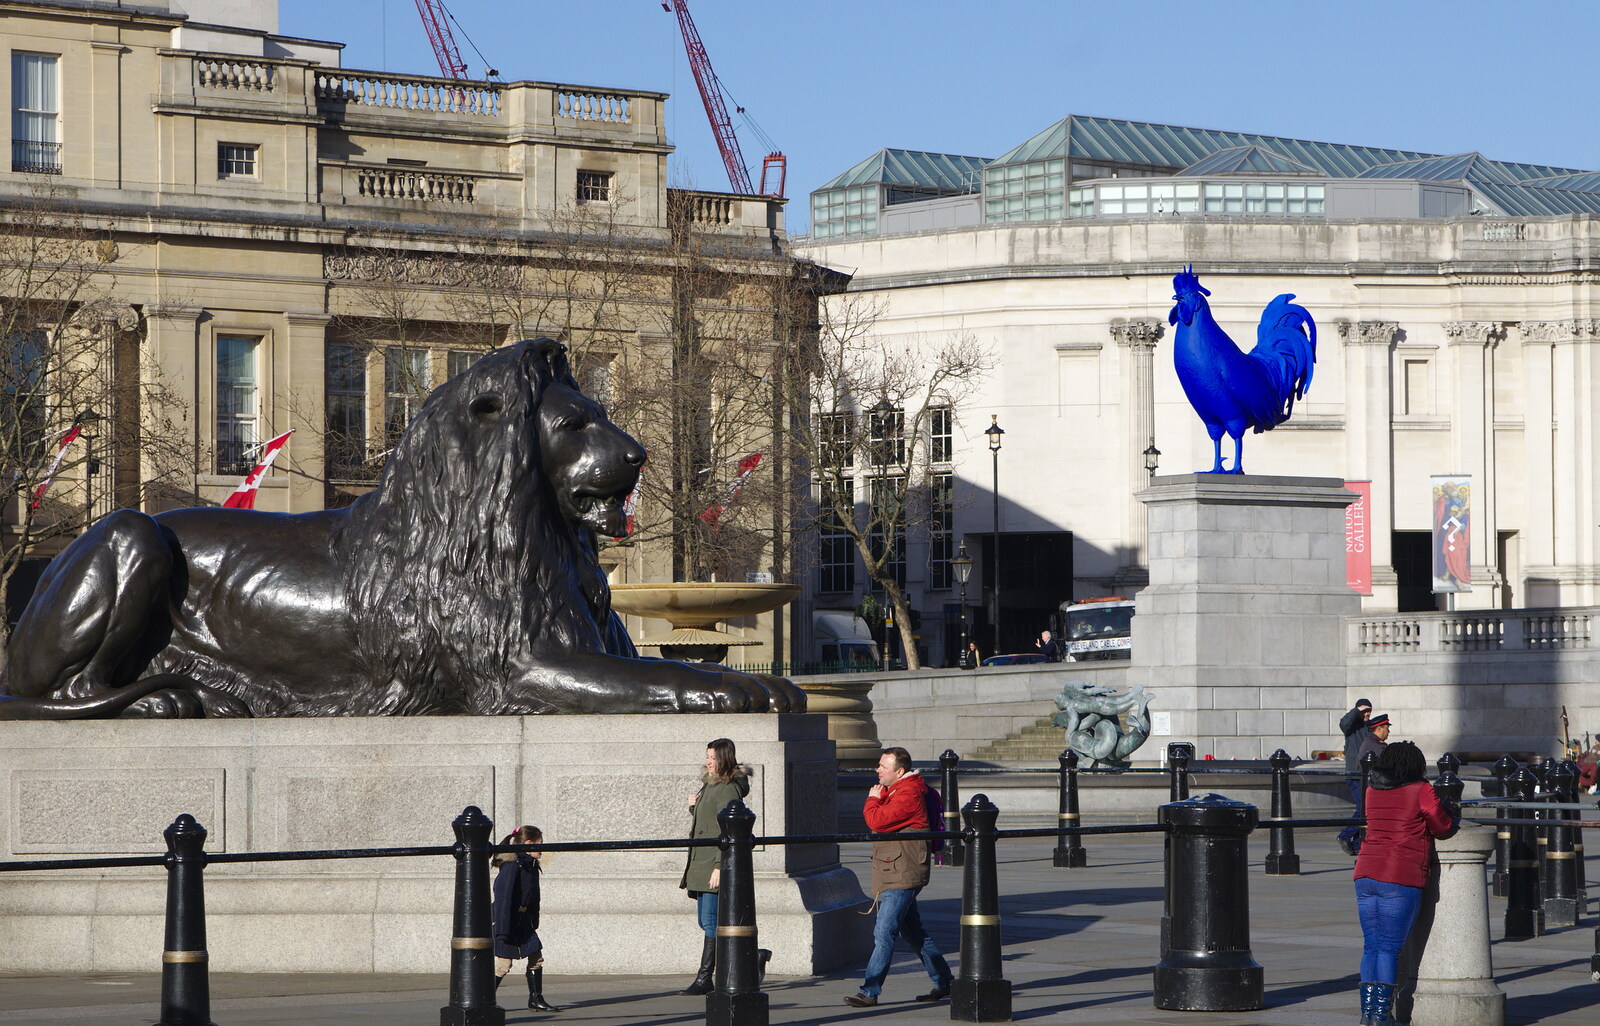 A lion and a cockerel from SwiftKey Innovation, The Hub, Westminster, London - 21st February 2014